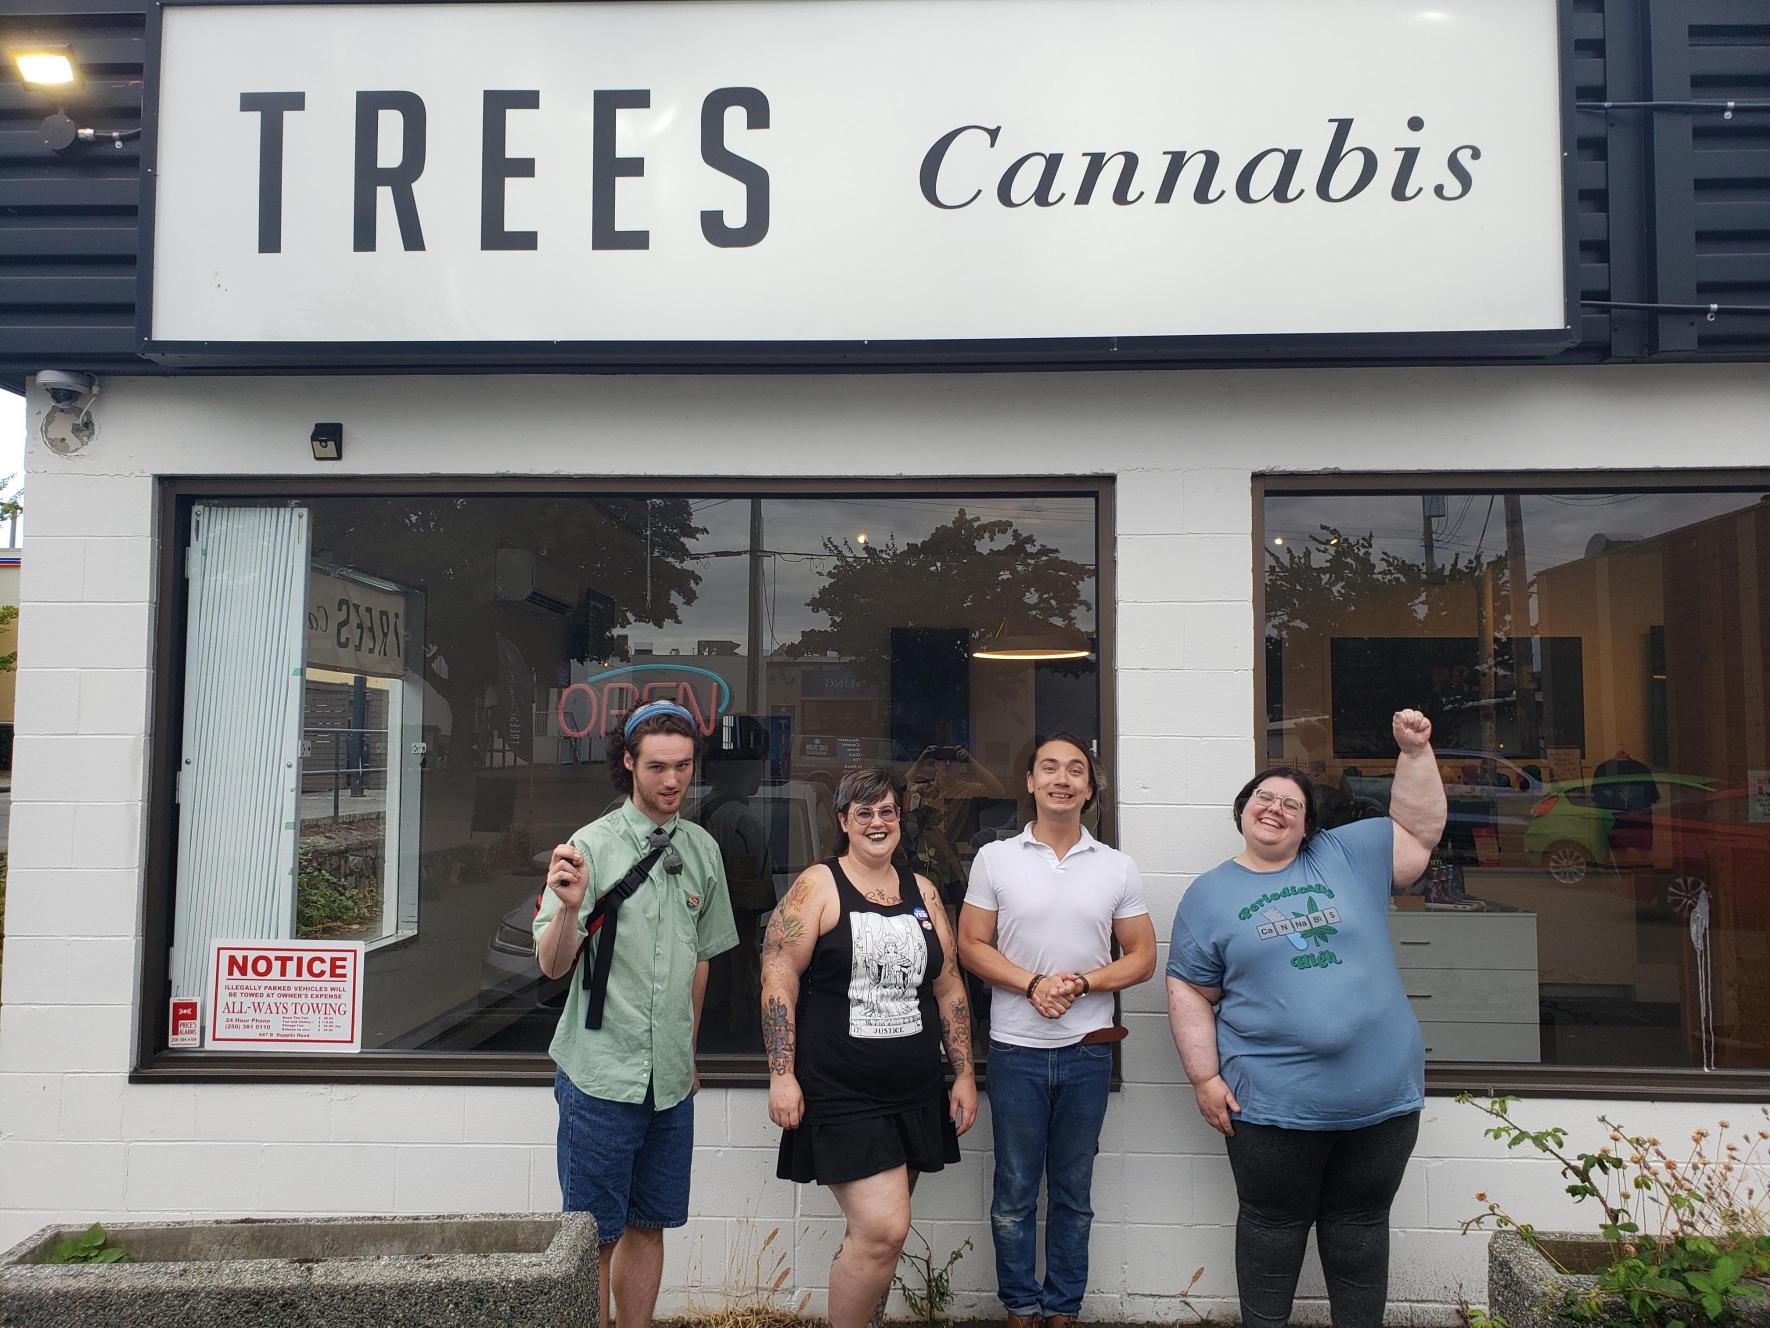 Workers at Trees Cannabis celebrate